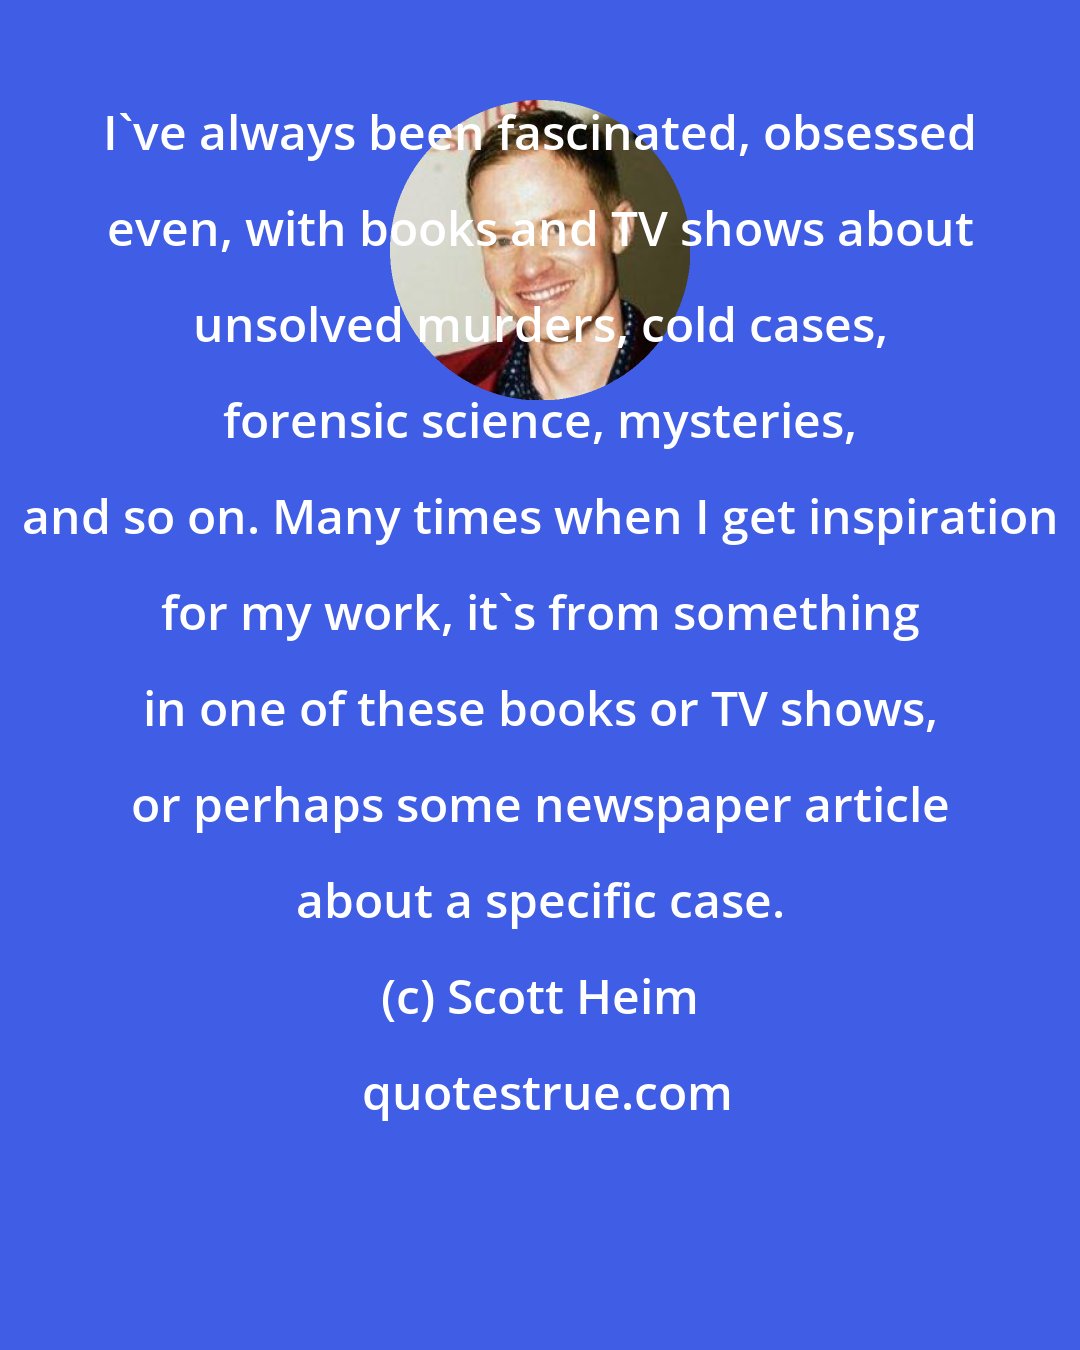 Scott Heim: I've always been fascinated, obsessed even, with books and TV shows about unsolved murders, cold cases, forensic science, mysteries, and so on. Many times when I get inspiration for my work, it's from something in one of these books or TV shows, or perhaps some newspaper article about a specific case.